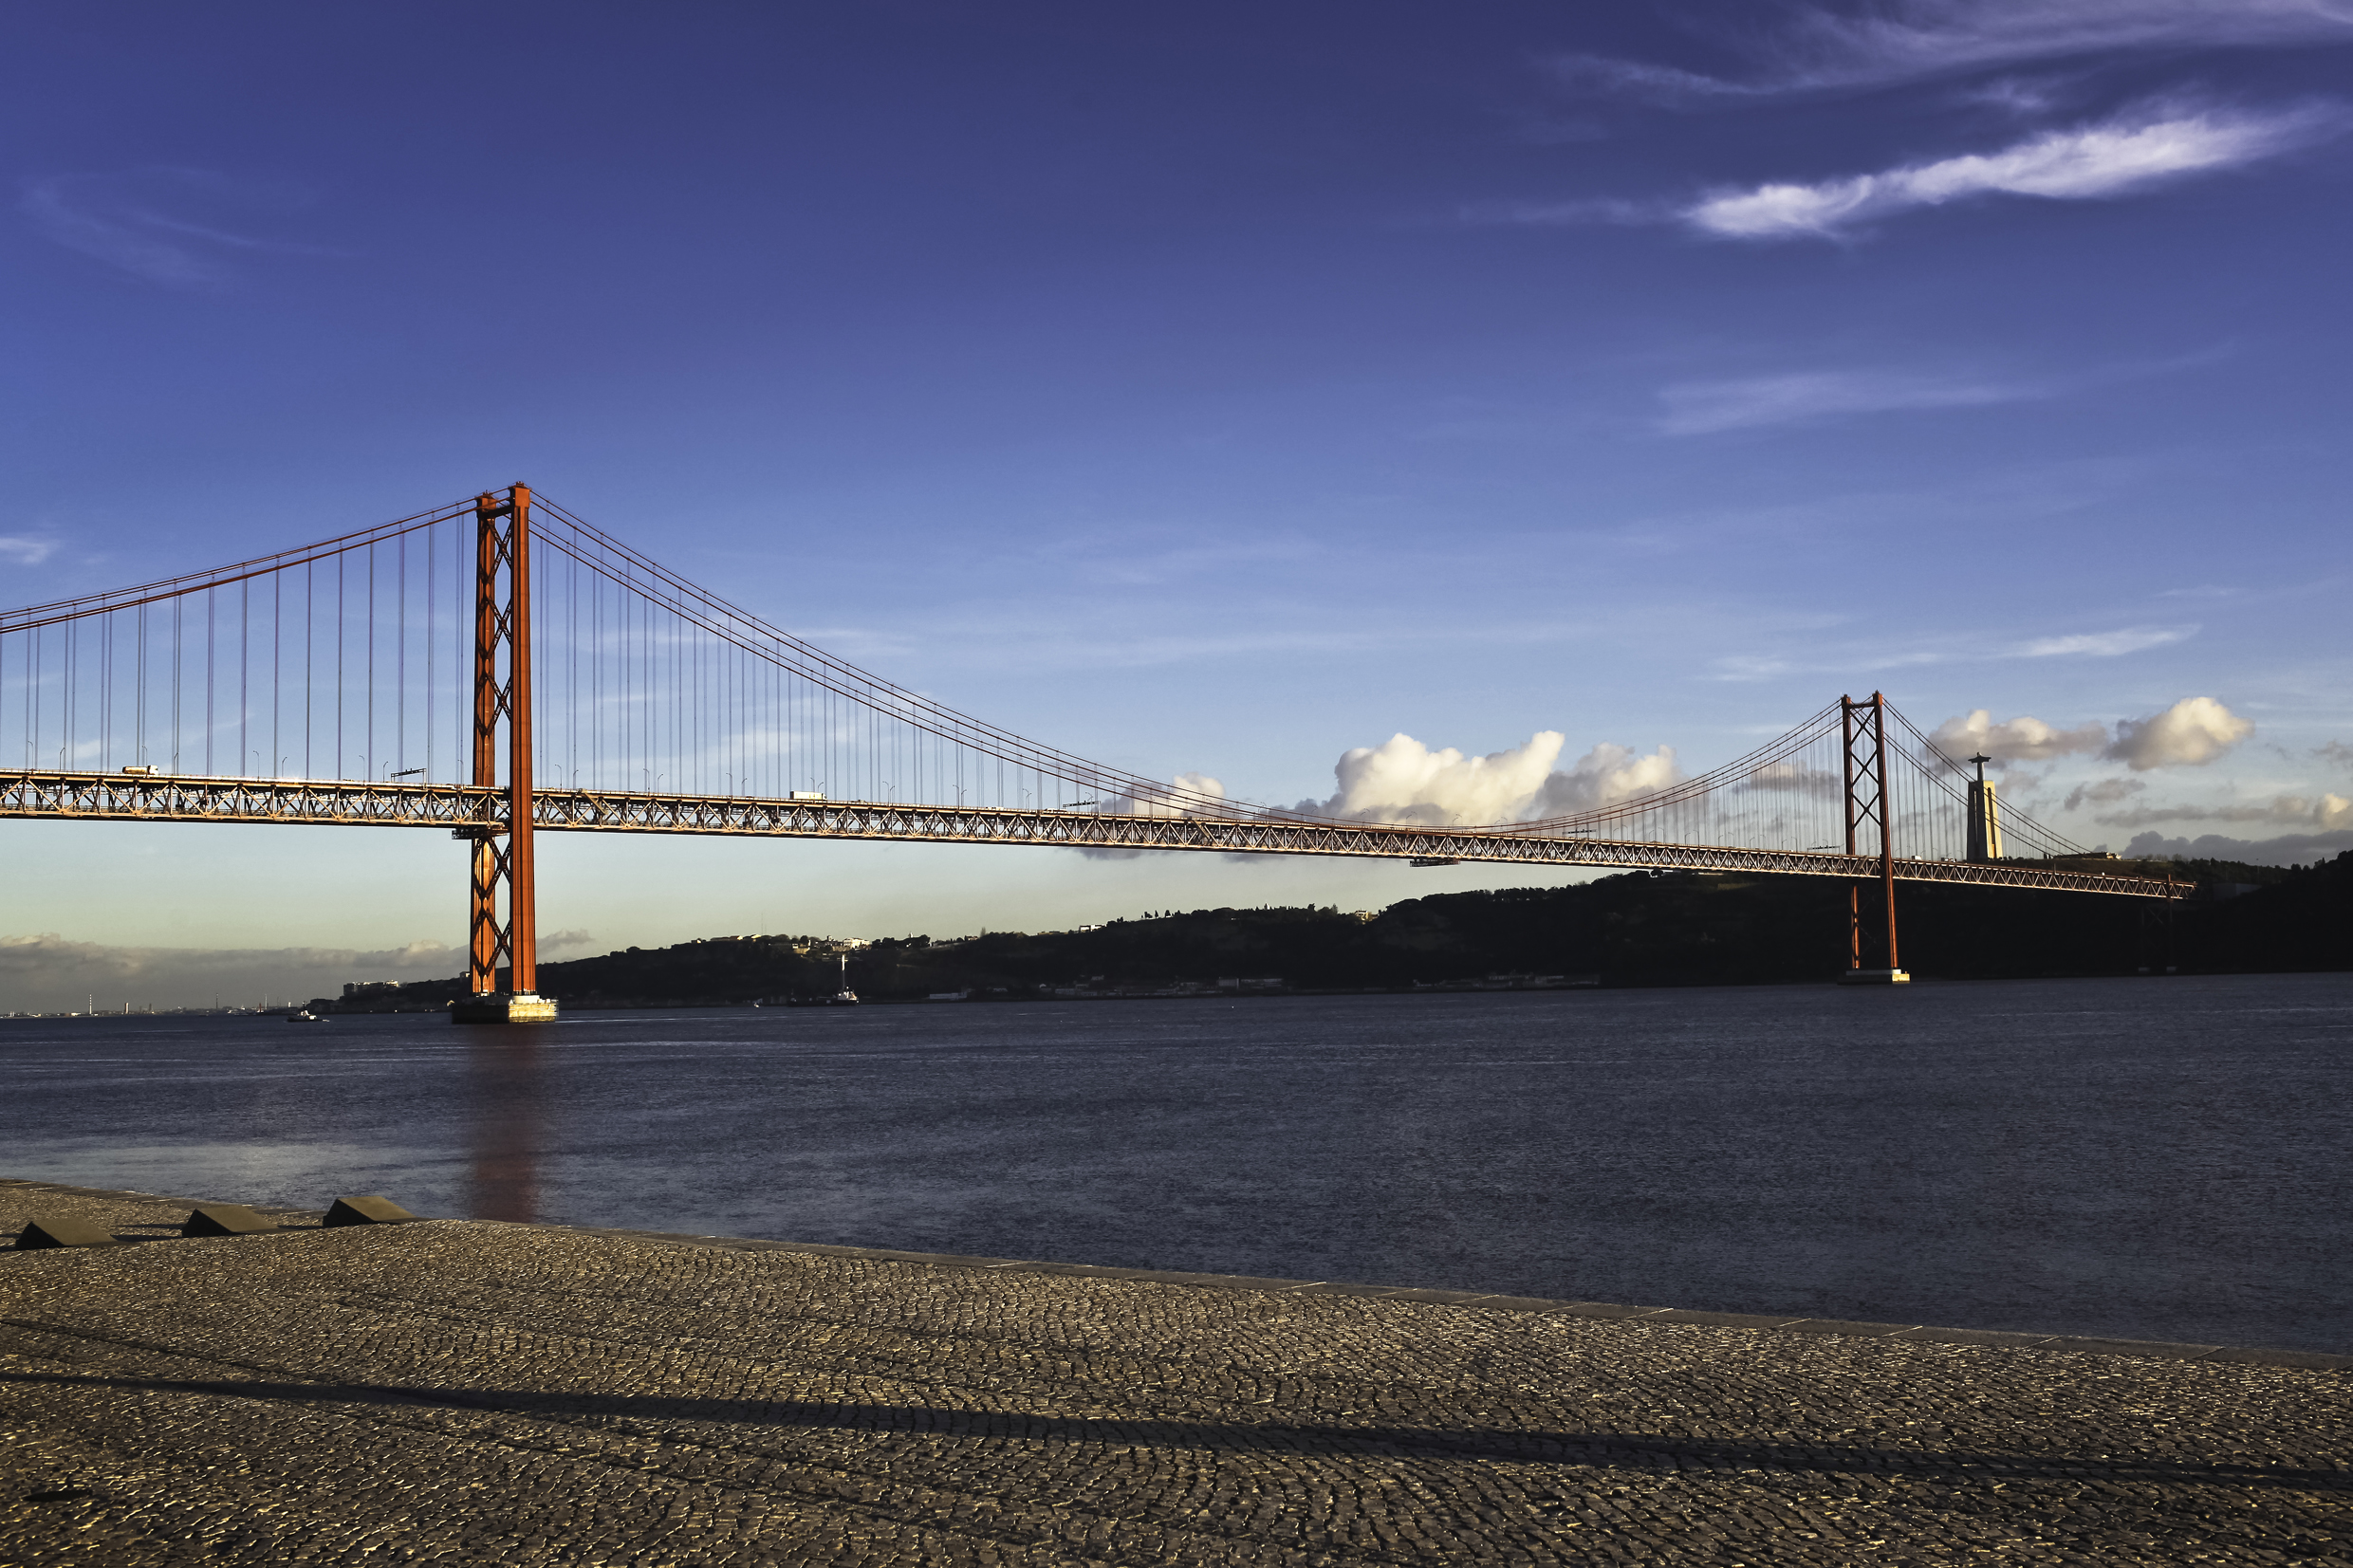 View of the 25 de Abril bridge in front of the Tagus river, where MAAT is located